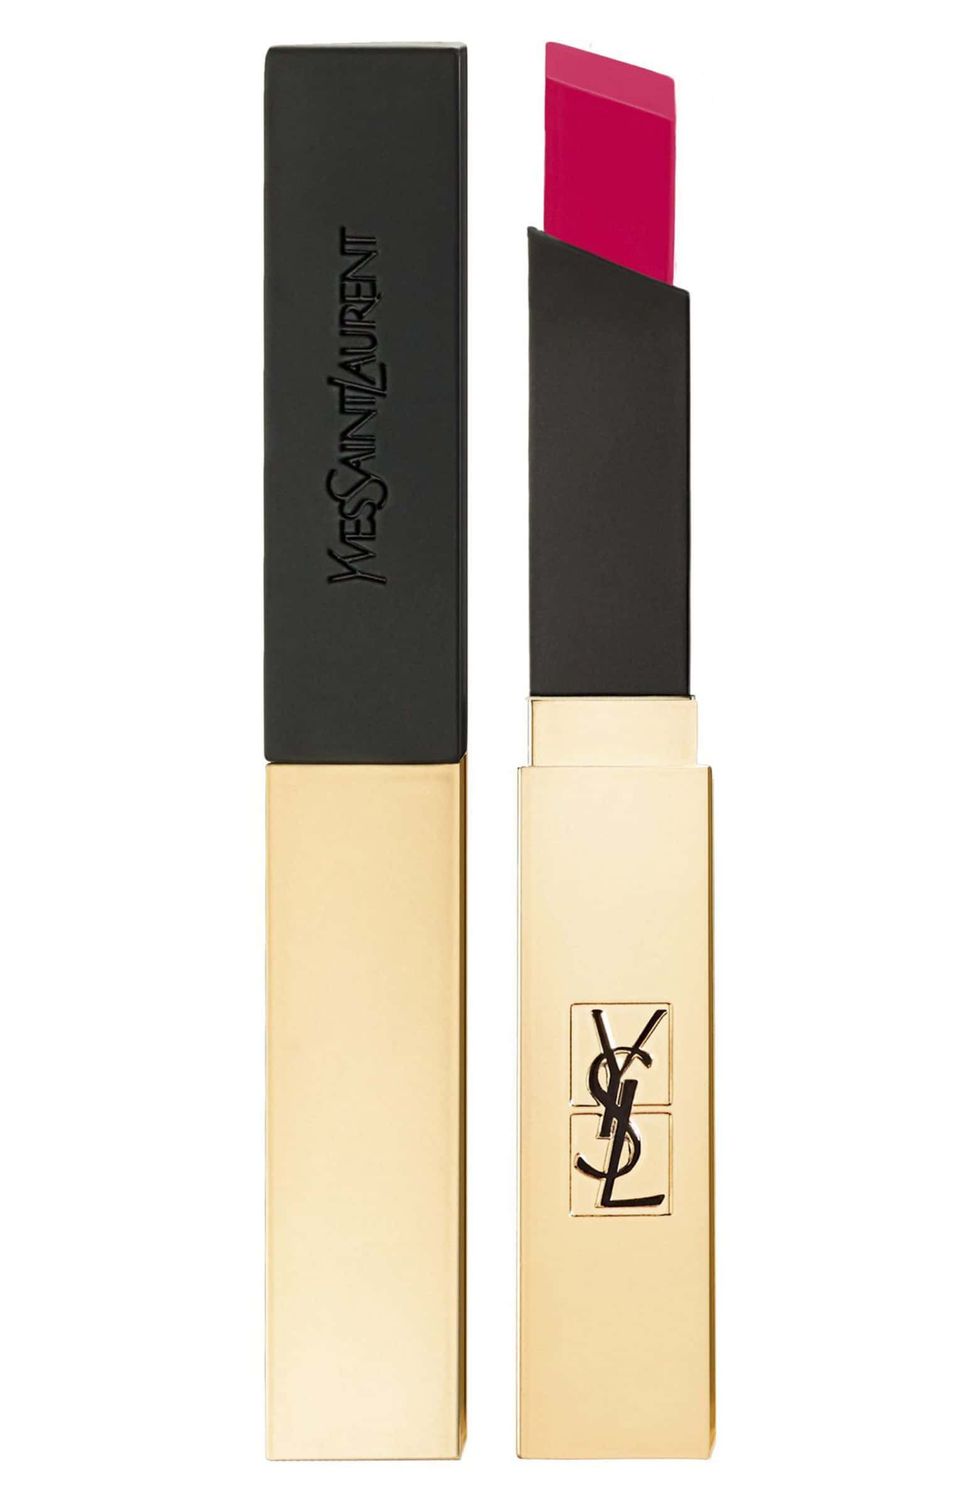 Yves Saint Laurent Rouge Pur Couture The Slim Matte Lipstick in Rose Curieux